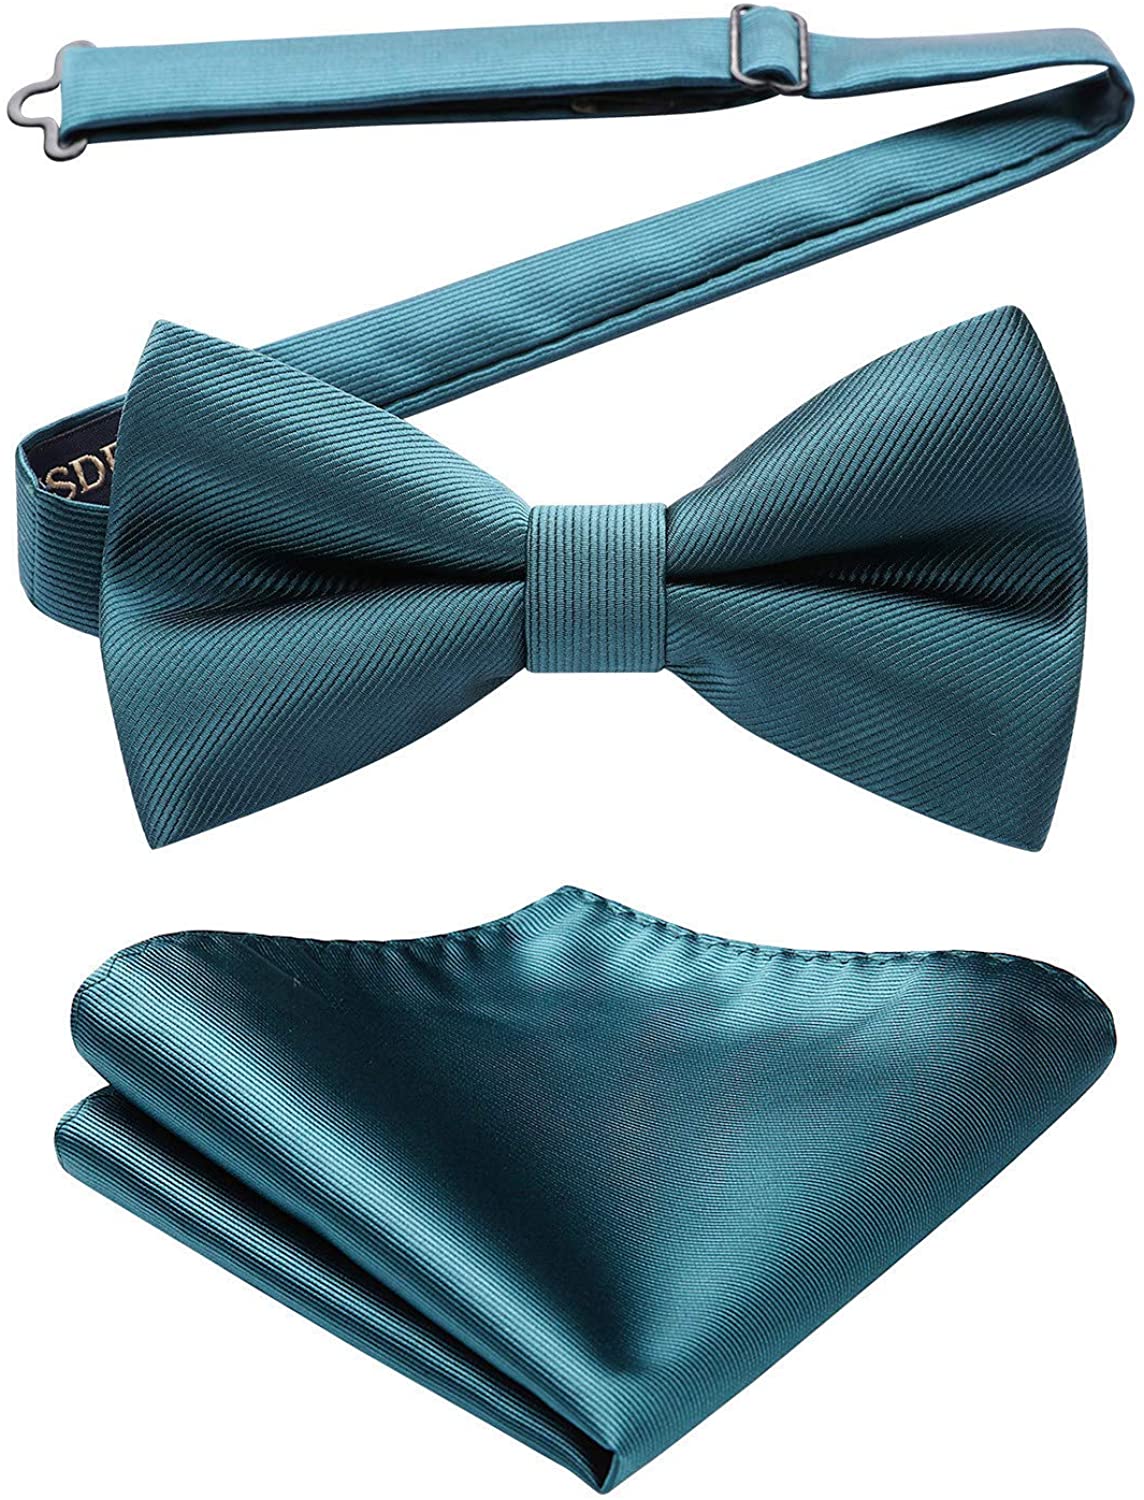 HISDERN Mens Classic Black Self Bow Tie and Pocket Square Set Black Tie Event Accessories